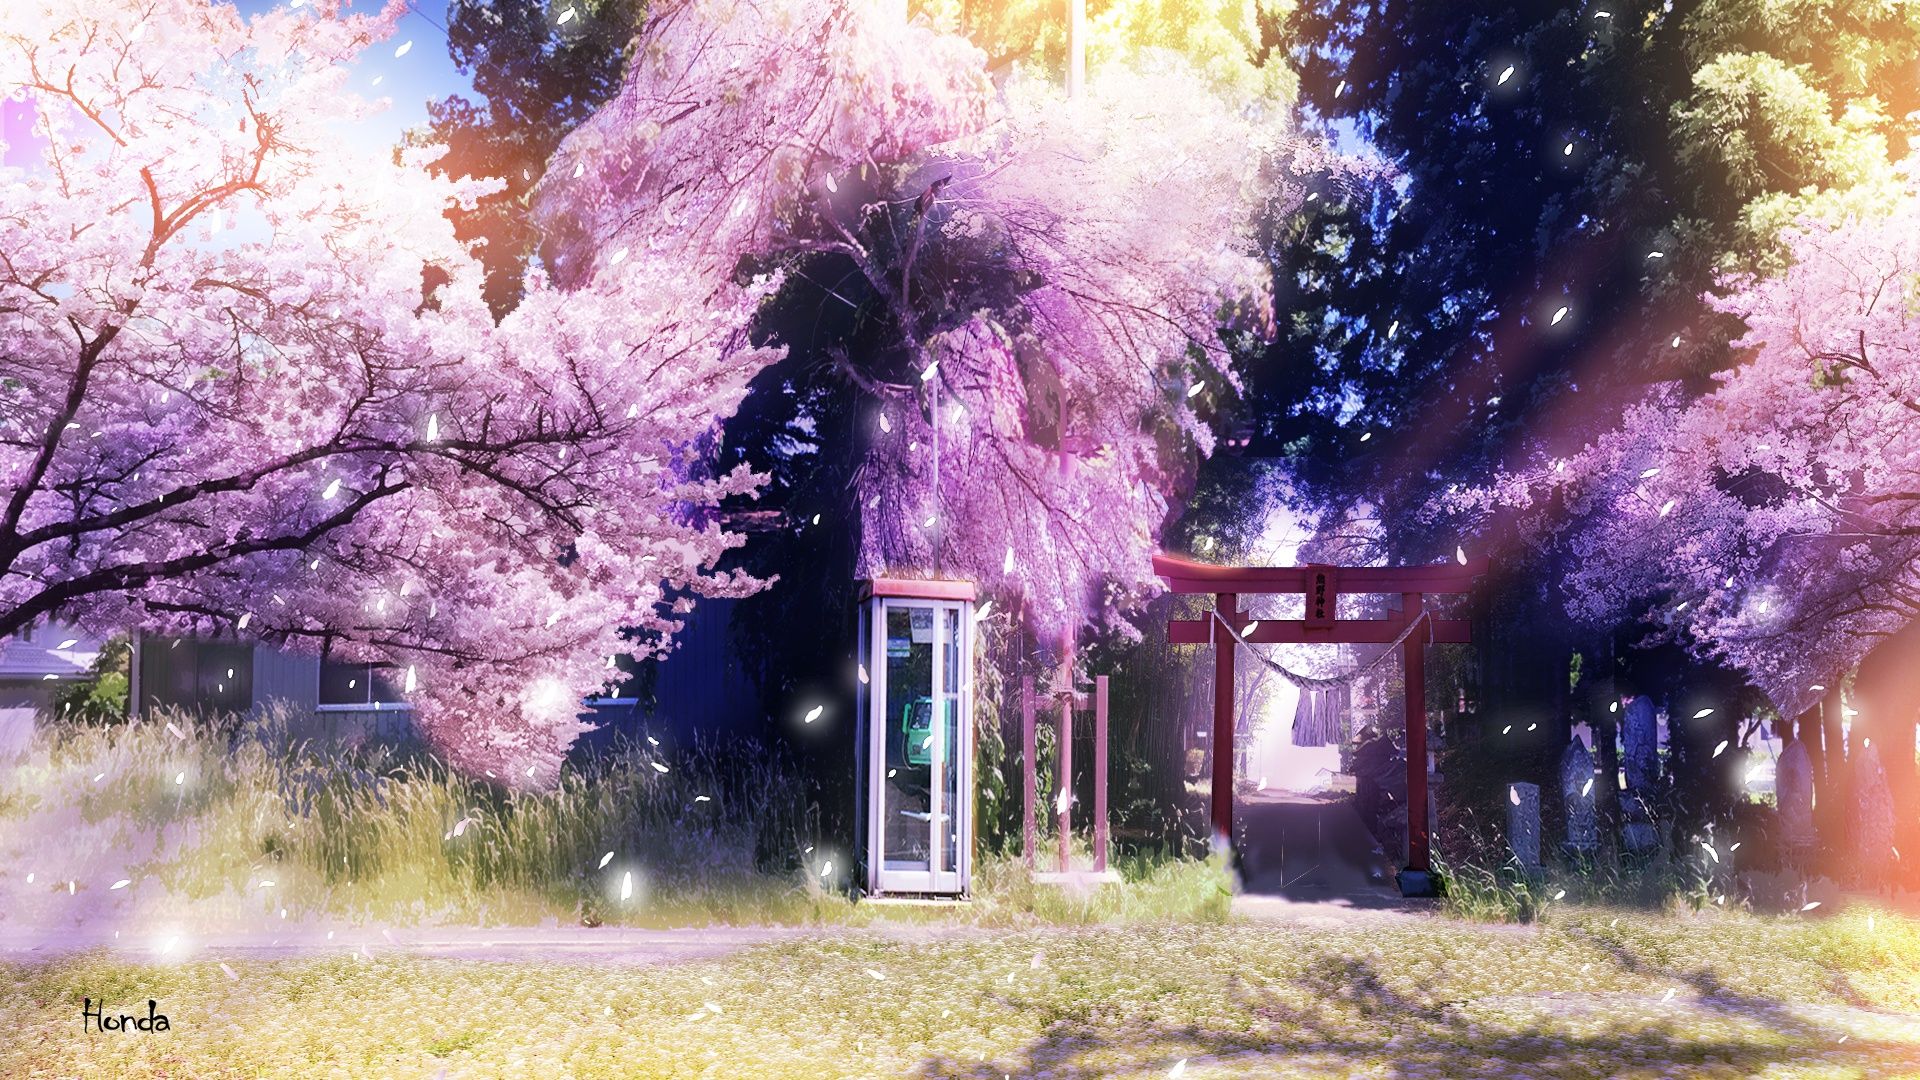 Cherry Blossoms Anime Scenery Wallpapers